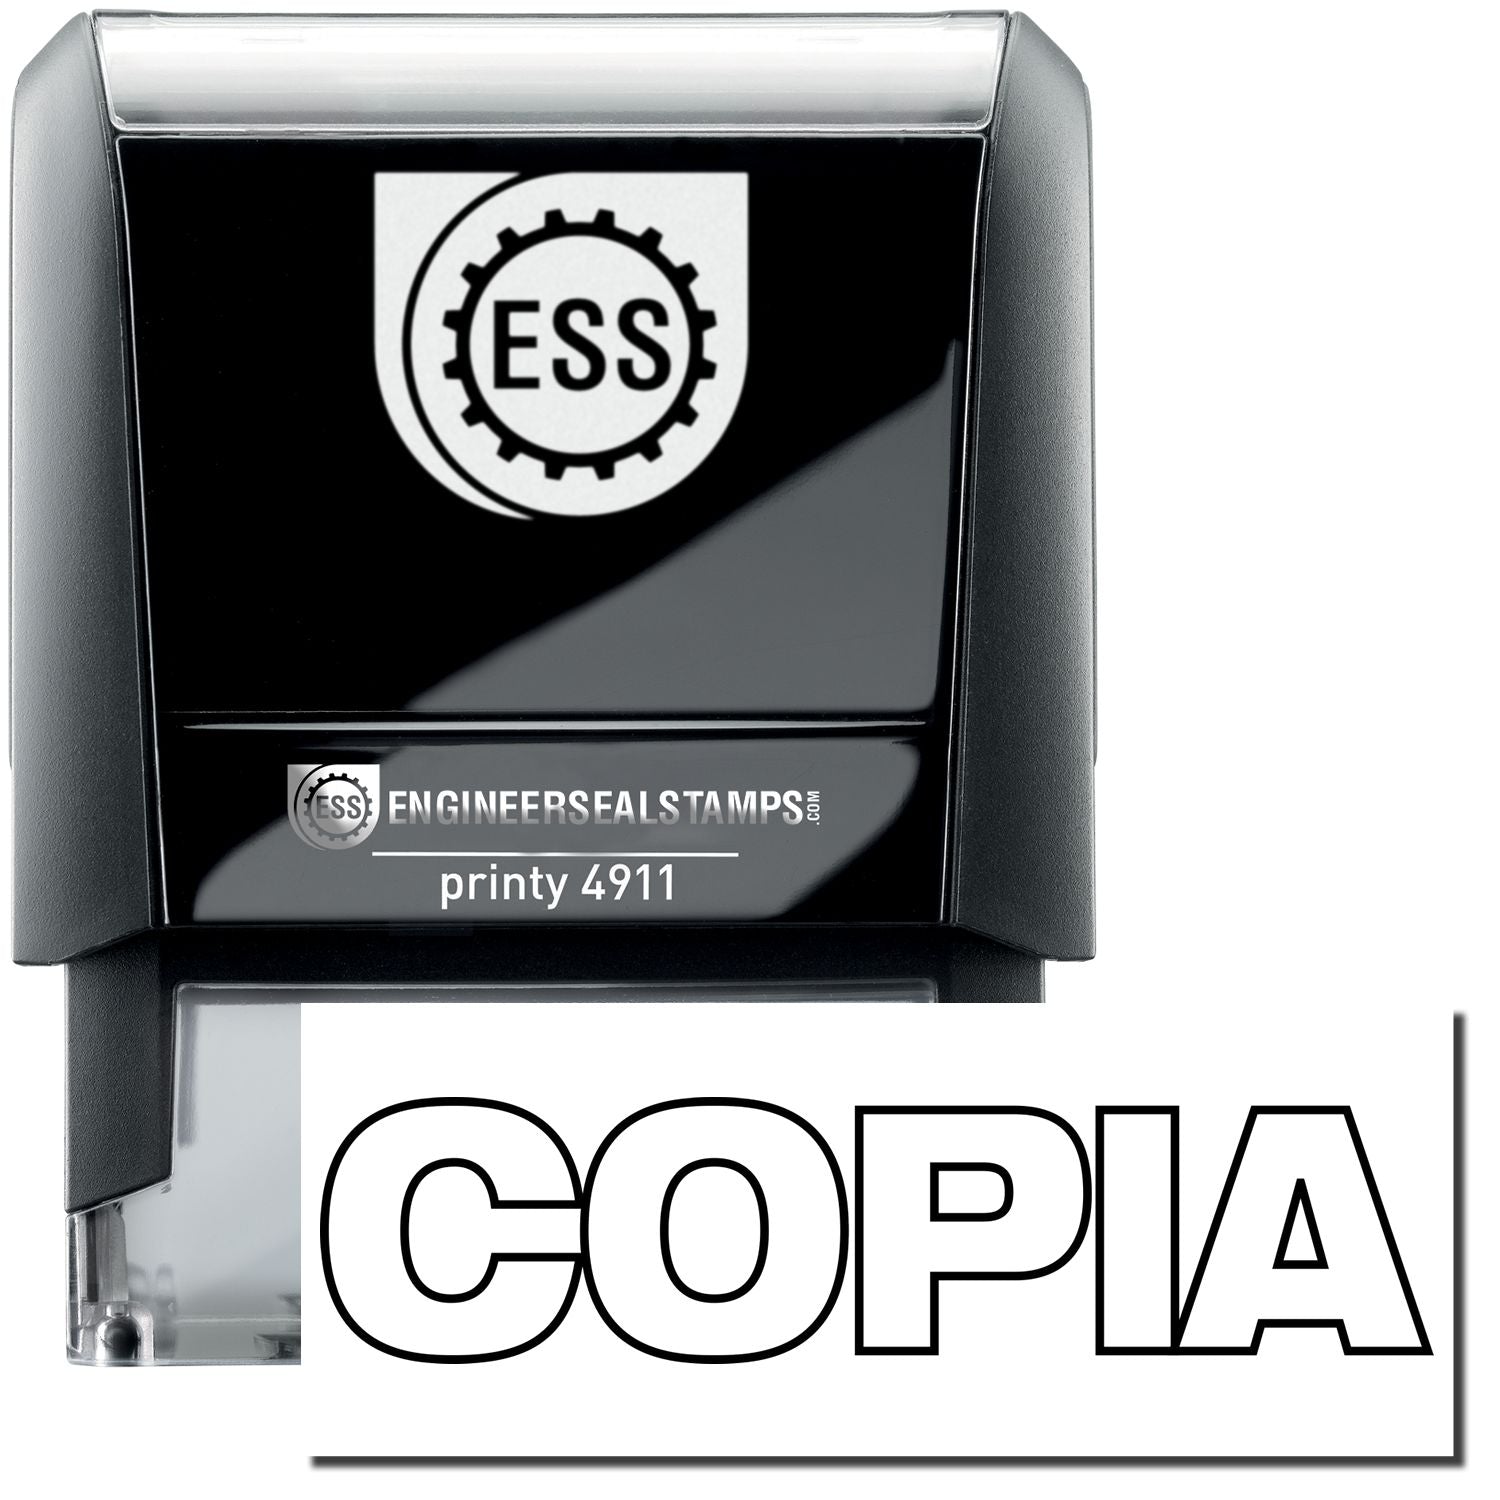 A self-inking stamp with a stamped image showing how the text "COPIA" in an outline style is displayed after stamping.